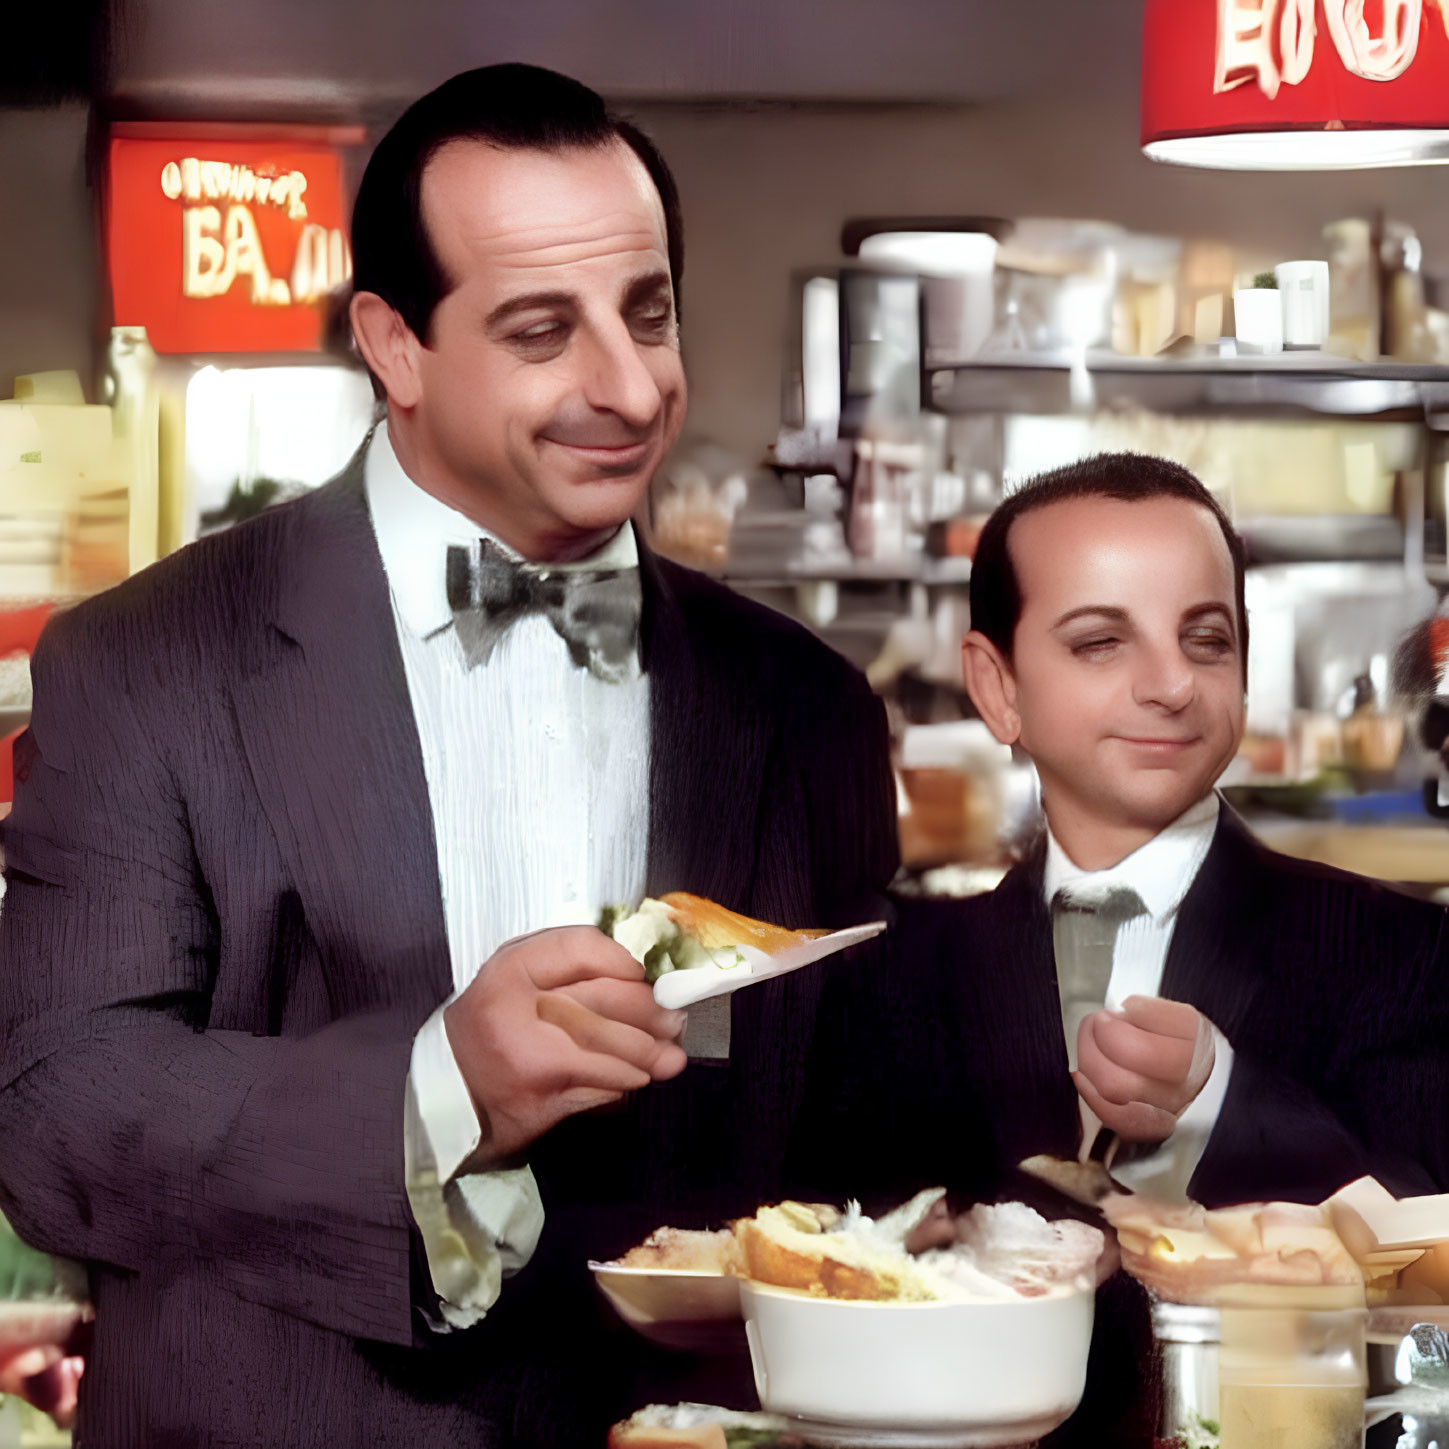 Adult and child in formal attire smiling at buffet with pie plate.